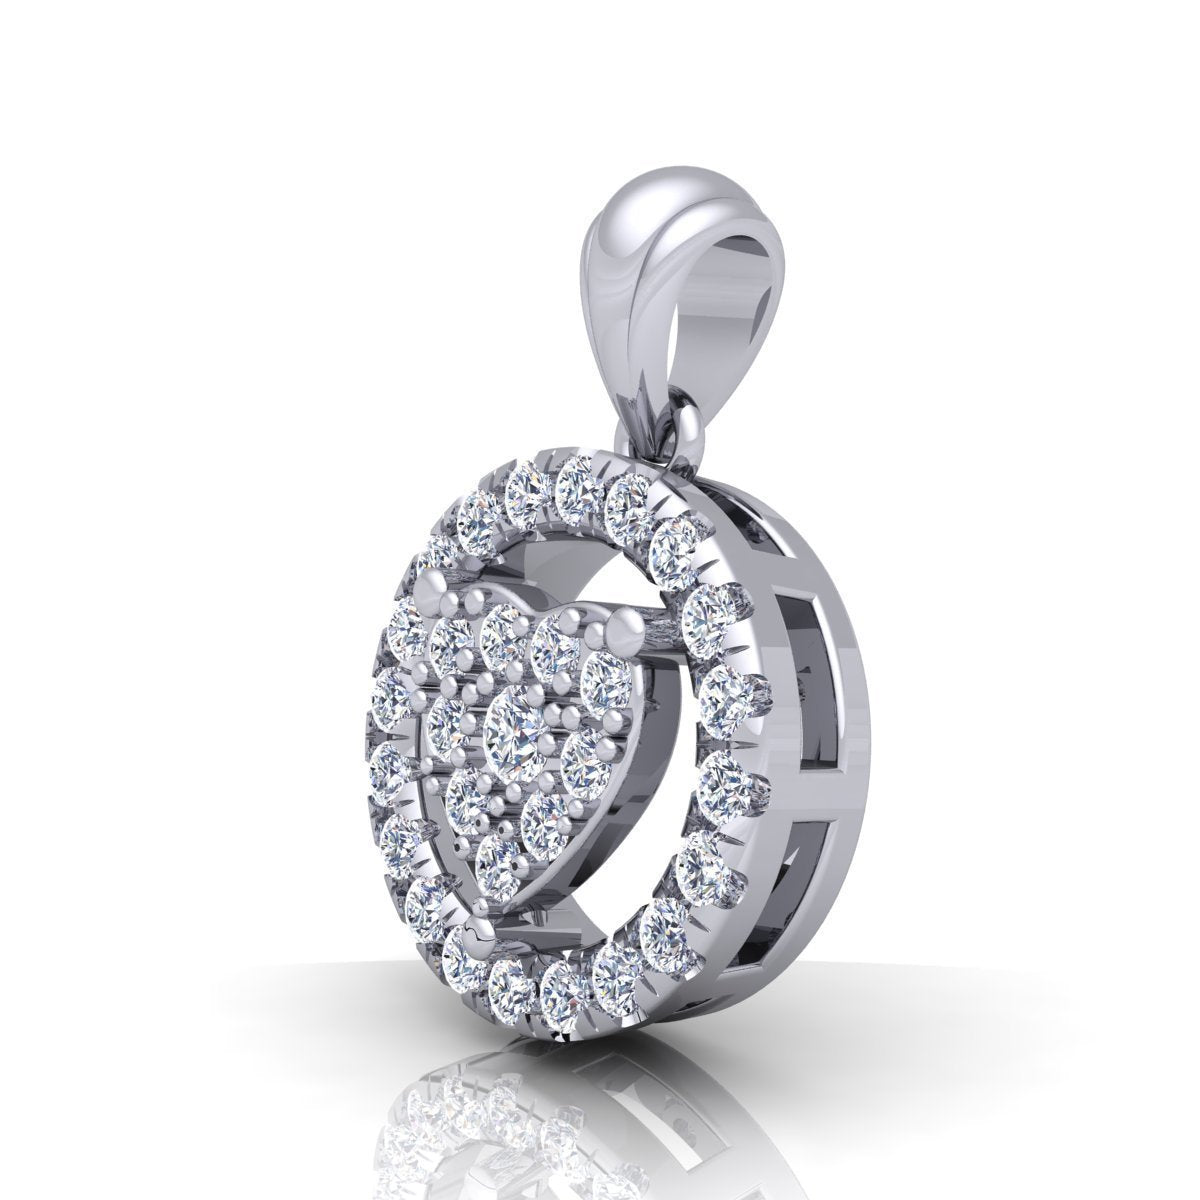 0.45 CT 14K White Gold D VVS2 Diamond Heart Pendant Round Cut Certified For Him For Her Anniversary Beautiful Gift